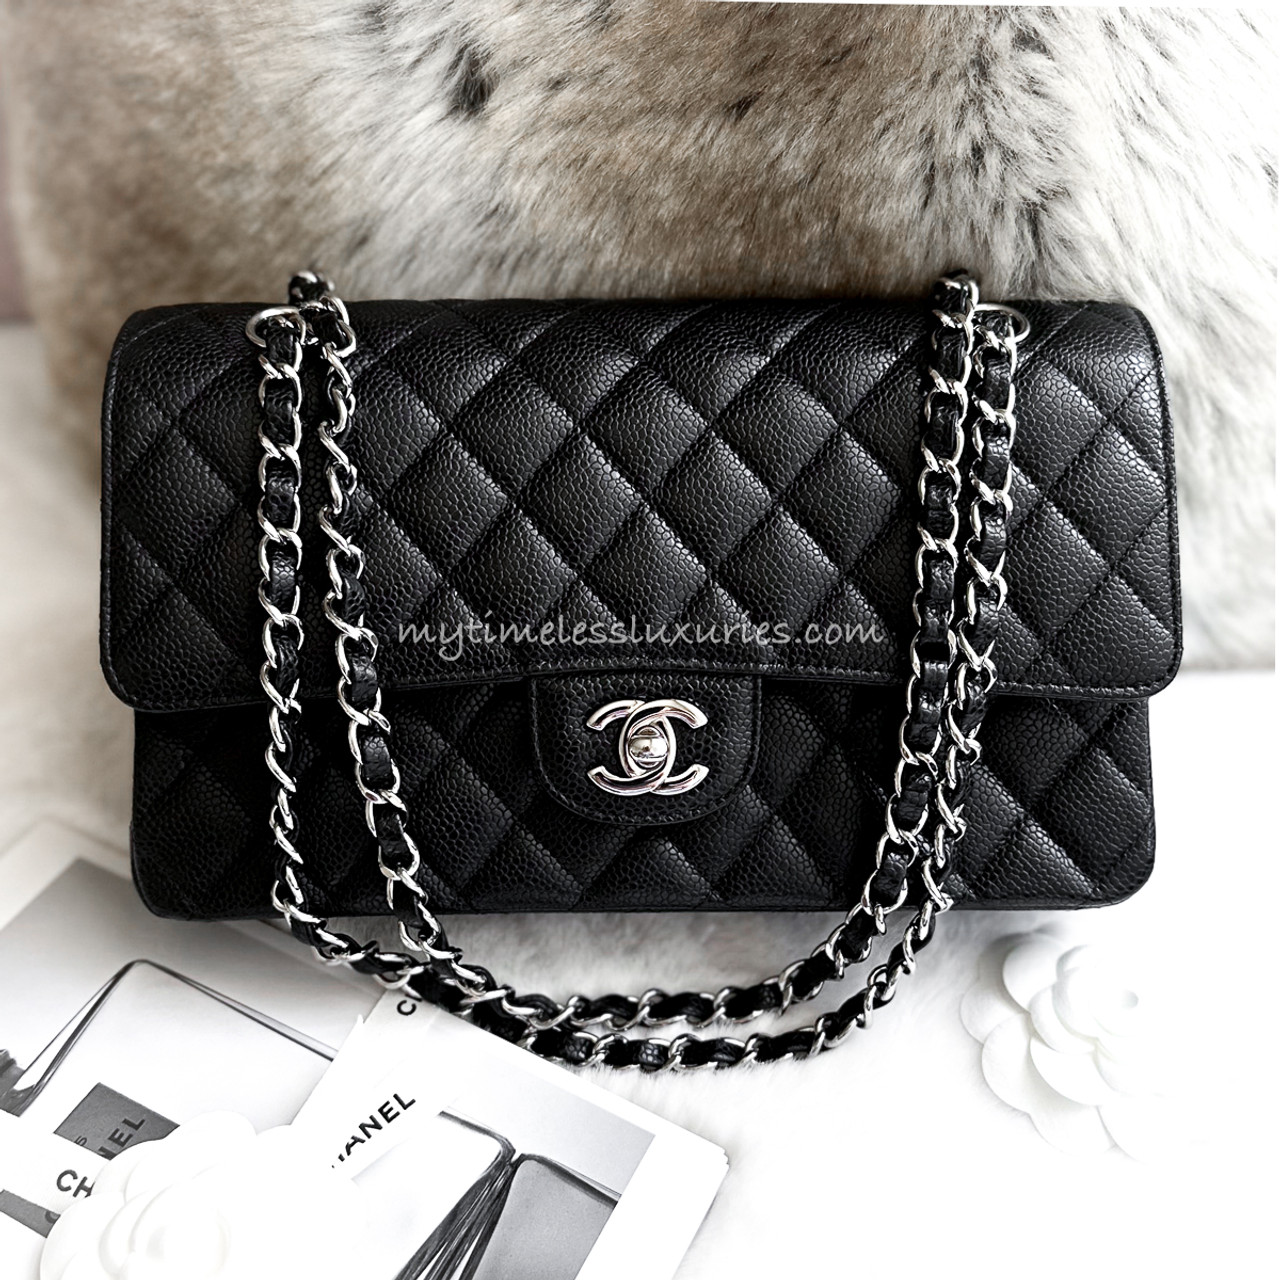 How does this Chanel classic flap, medium size, caviar, silver